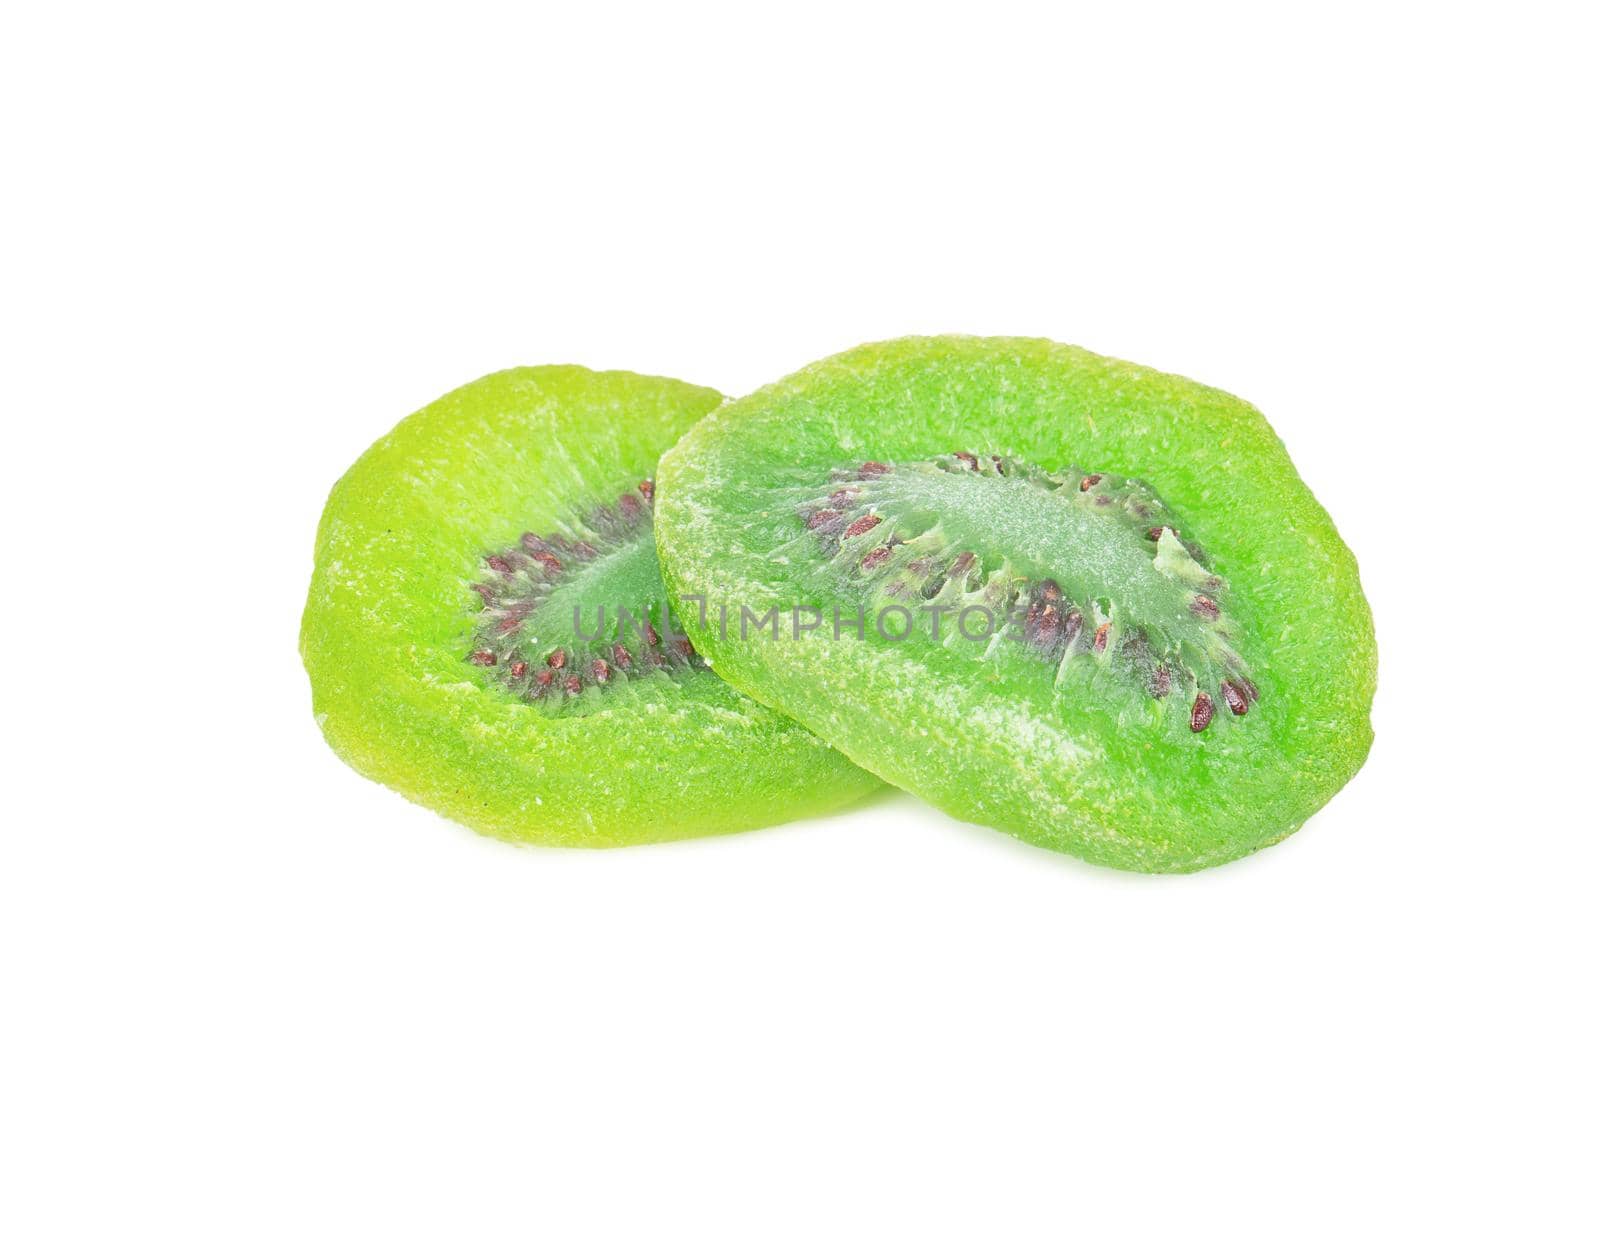 Two dry slices of kiwi isolate on a white background